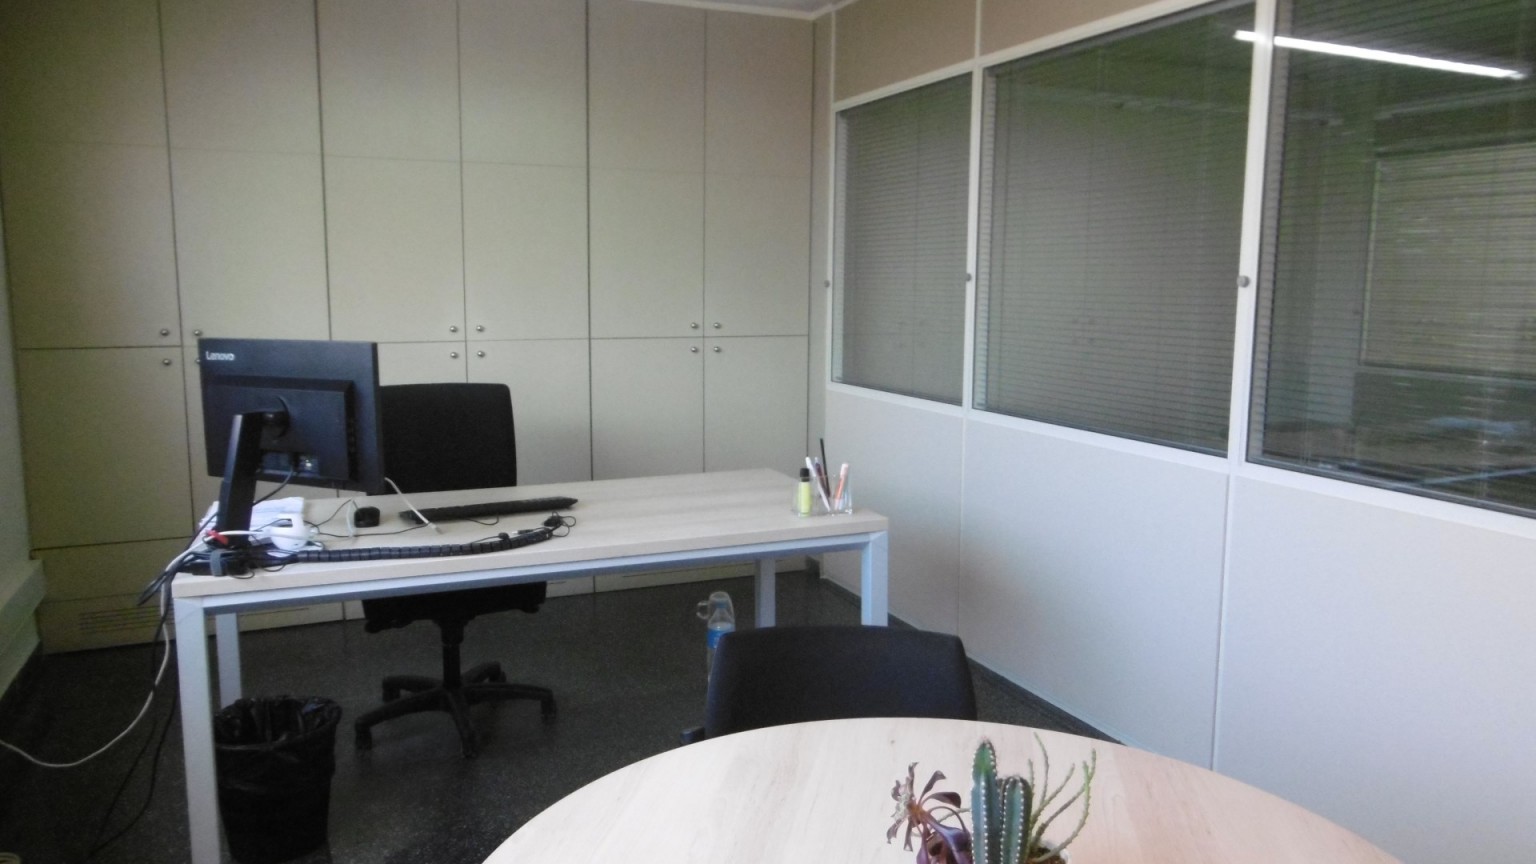 Luminous professional office for sale - Located in the "SINDICATS" building